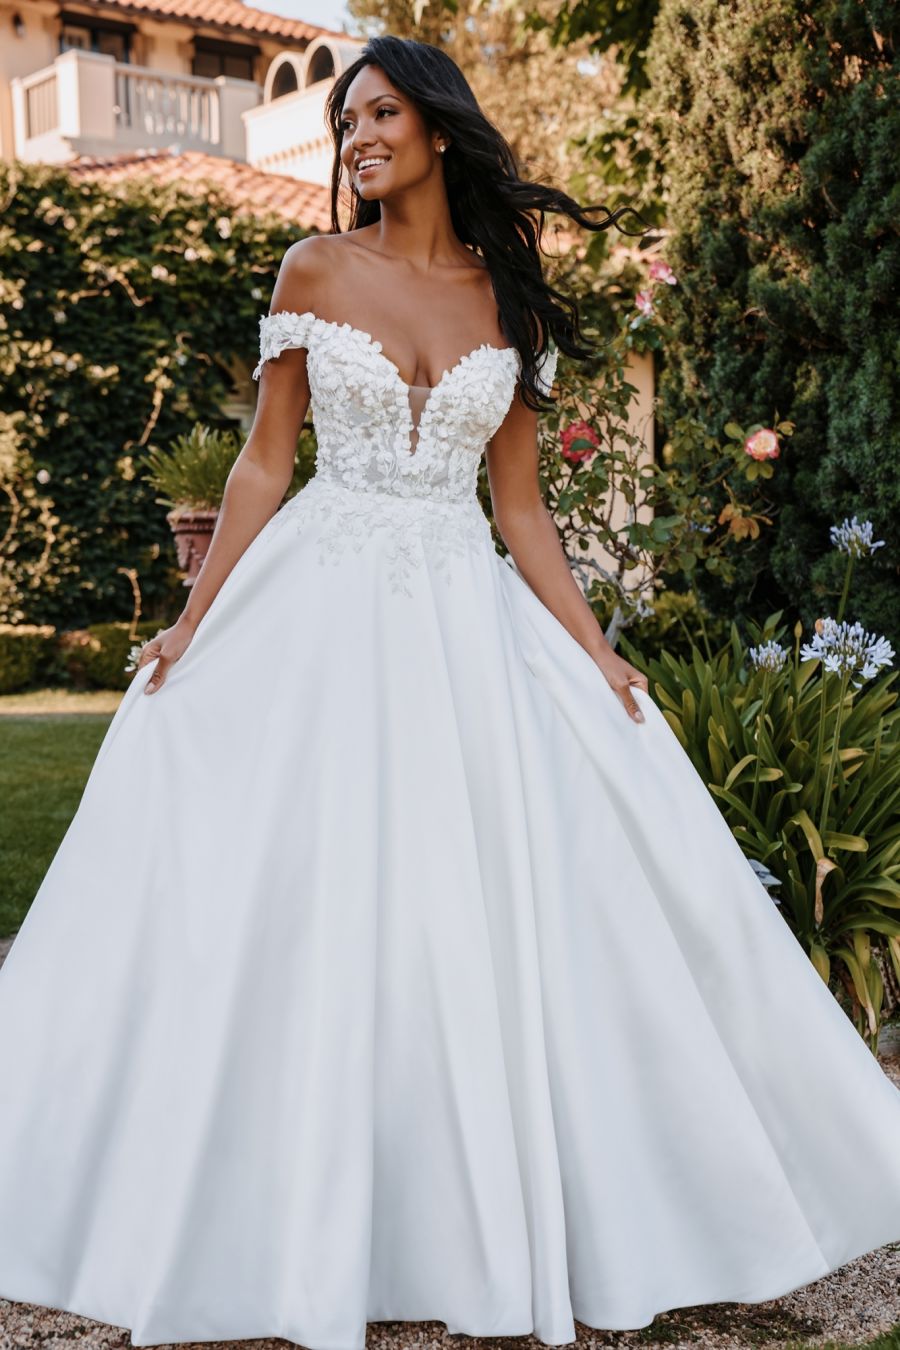 Off The Shoulder Ballgown Wedding Dress With Florals On Bodice And Train   Kleinfeld Bridal  Allure bridal couture Wedding dresses sweetheart  neckline Wedding dress necklines